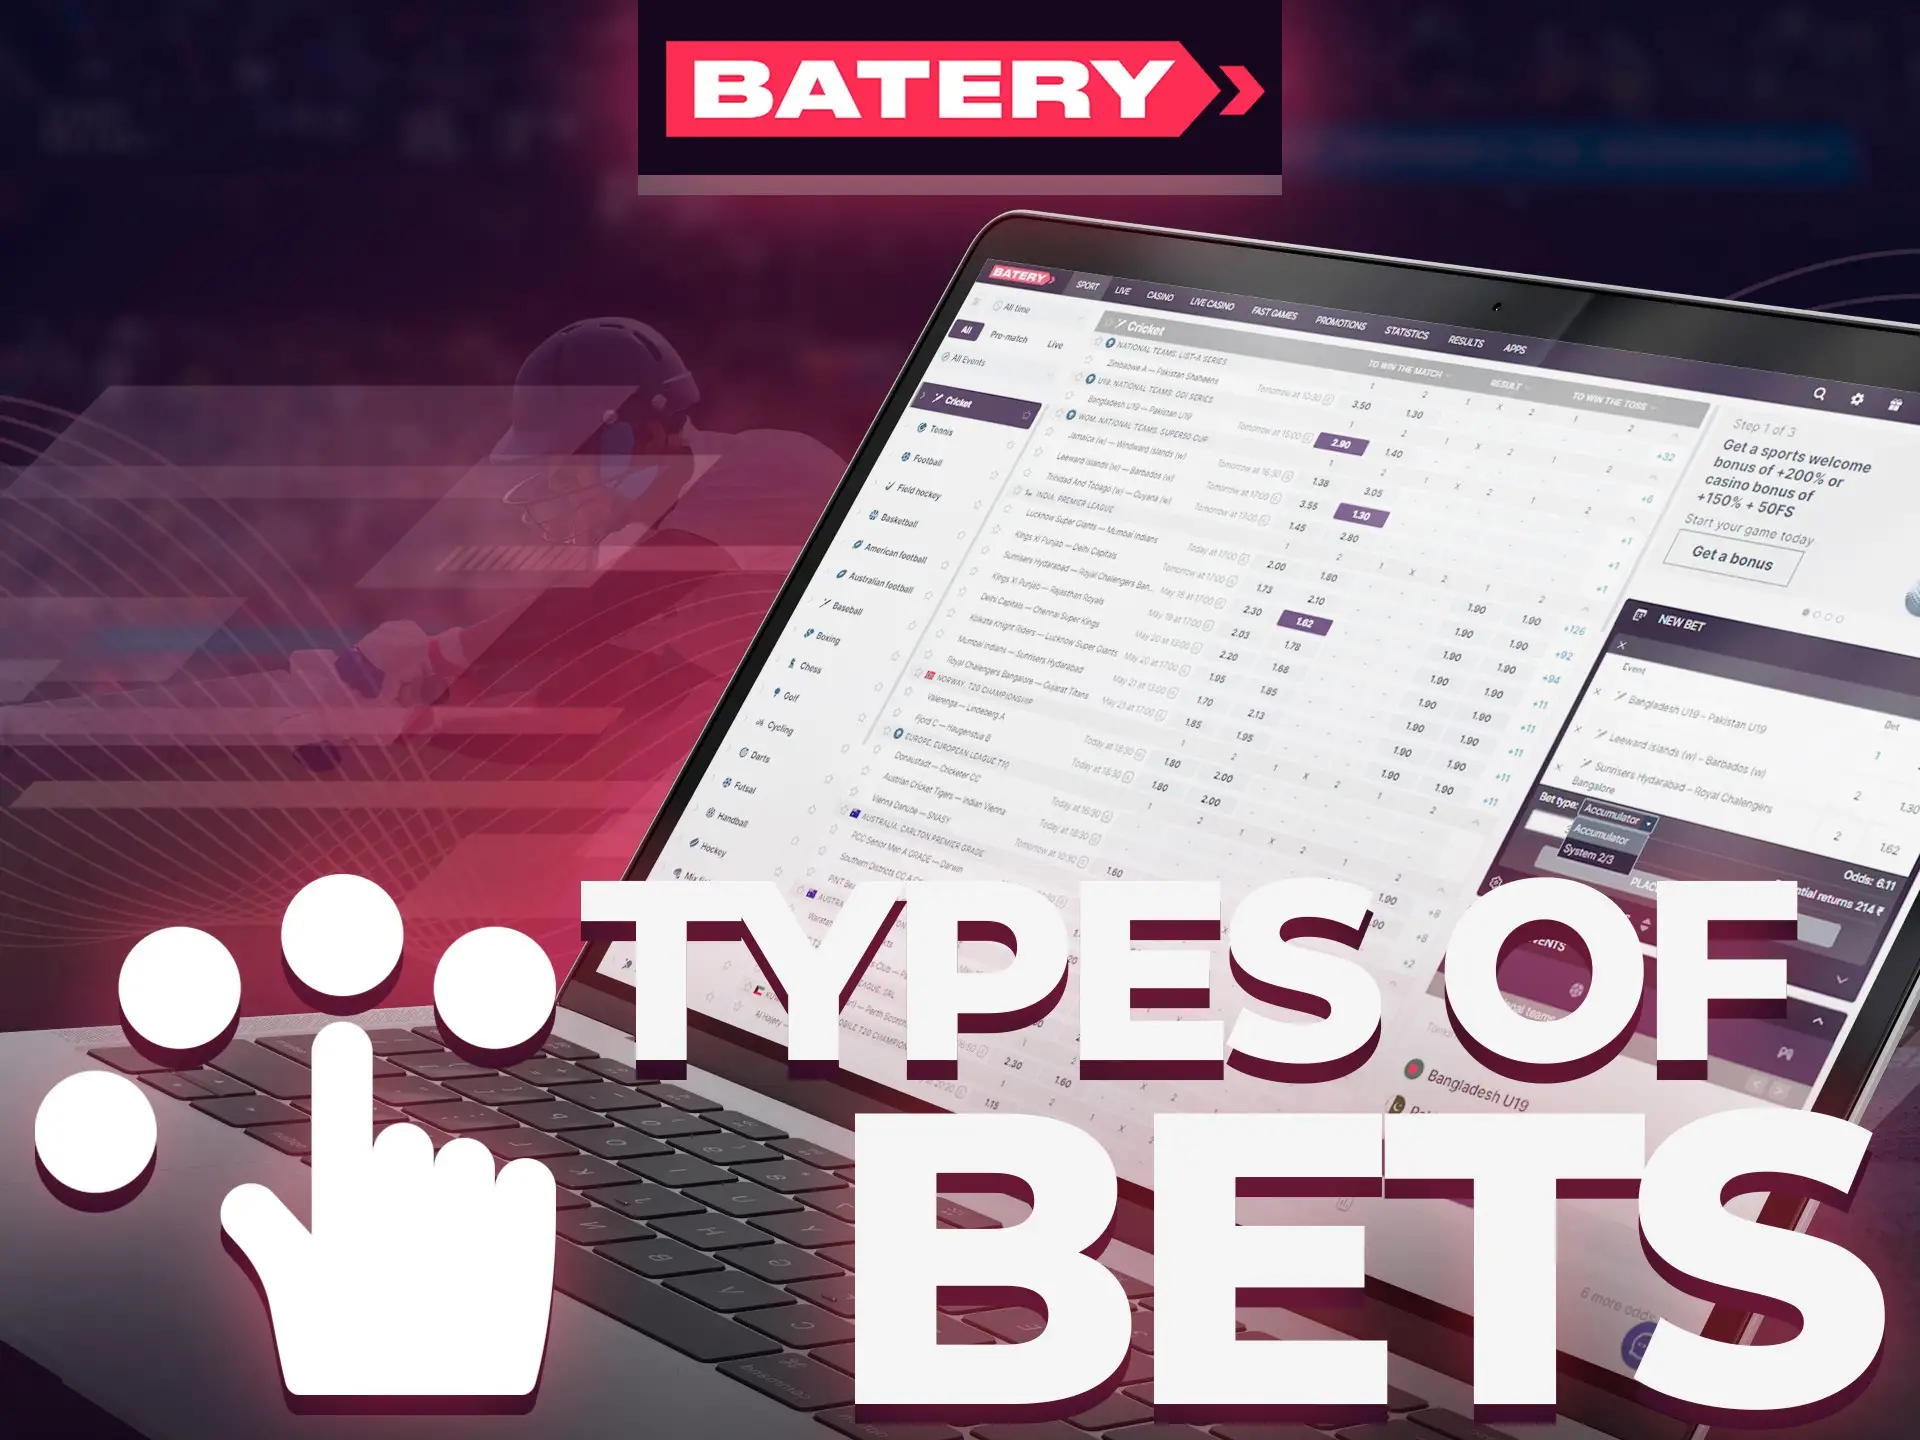 Choose your favourite bet type and make bet at Batery.